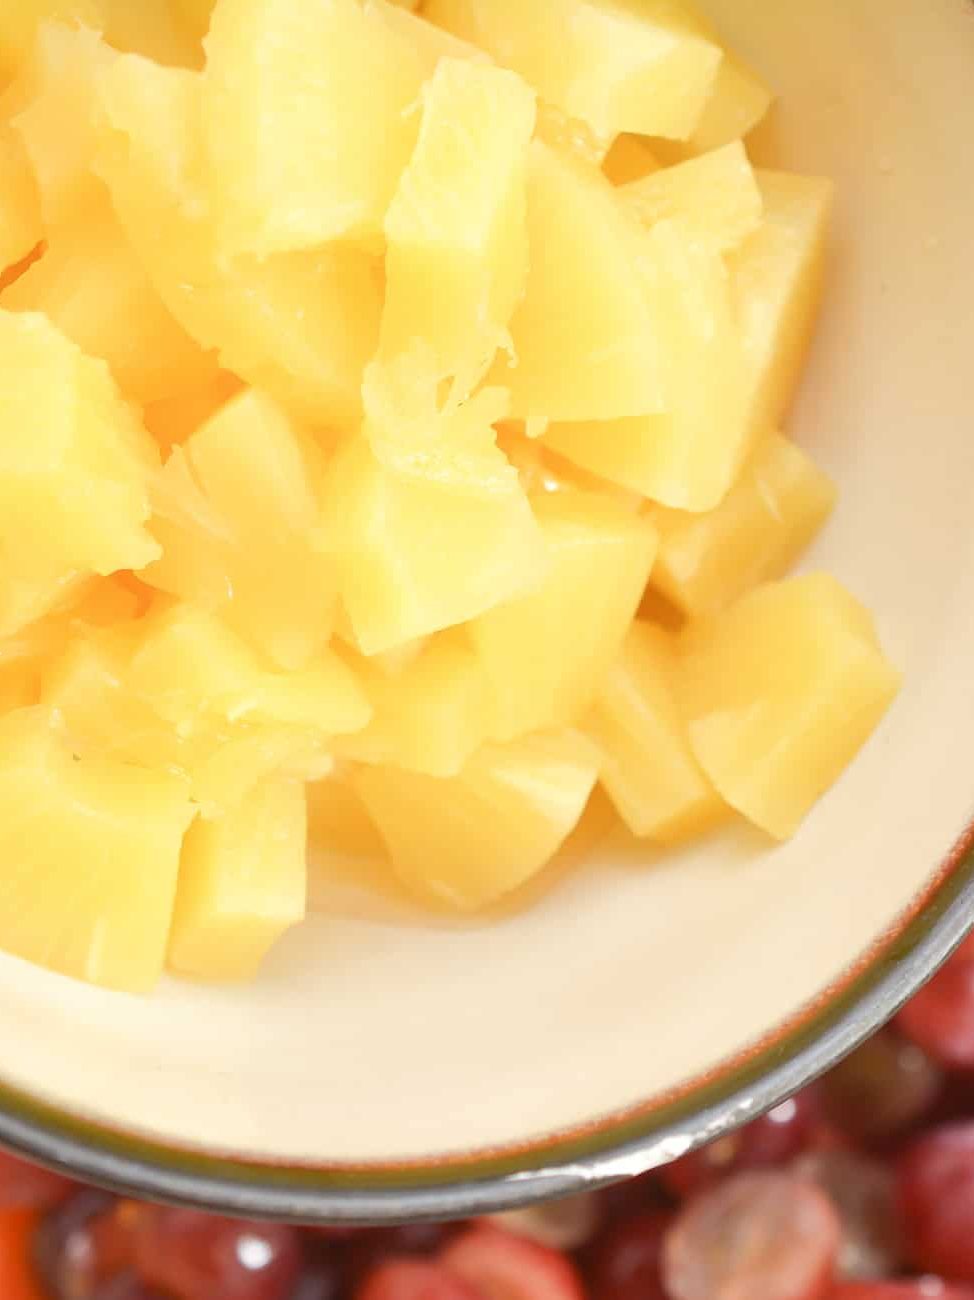 add 1 can of pineapple chunks in 100% juice undrained.